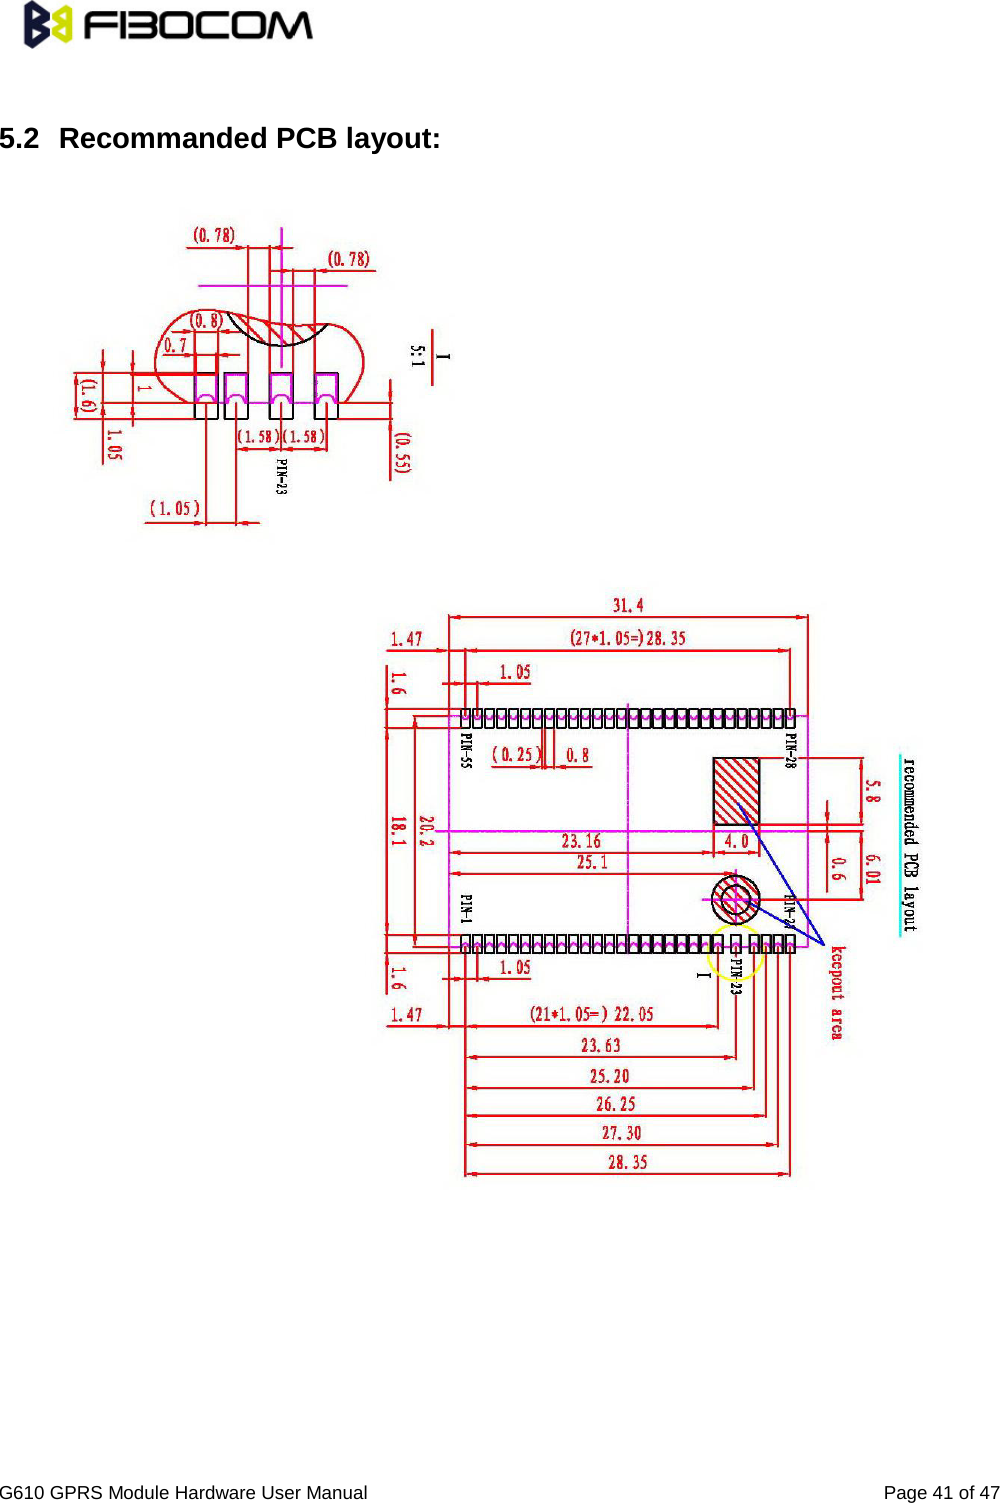                                                                                                  G610 GPRS Module Hardware User Manual                                                          Page 41 of 47   5.2 Recommanded PCB layout:                                  